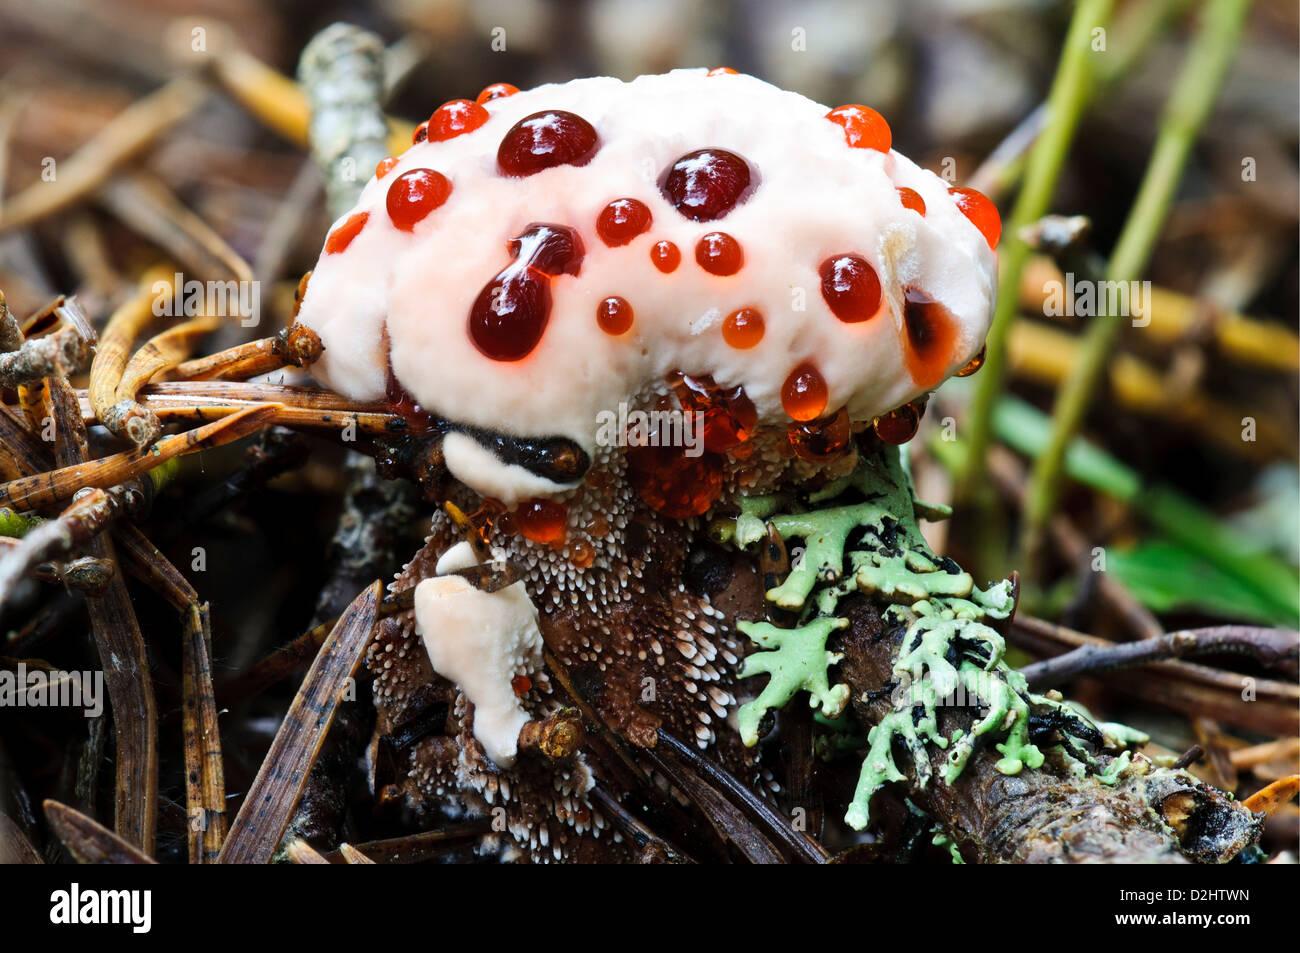 the-fruiting-body-of-devils-tooth-fungus-hydnellum-peckii-growing-D2HTWN.jpg